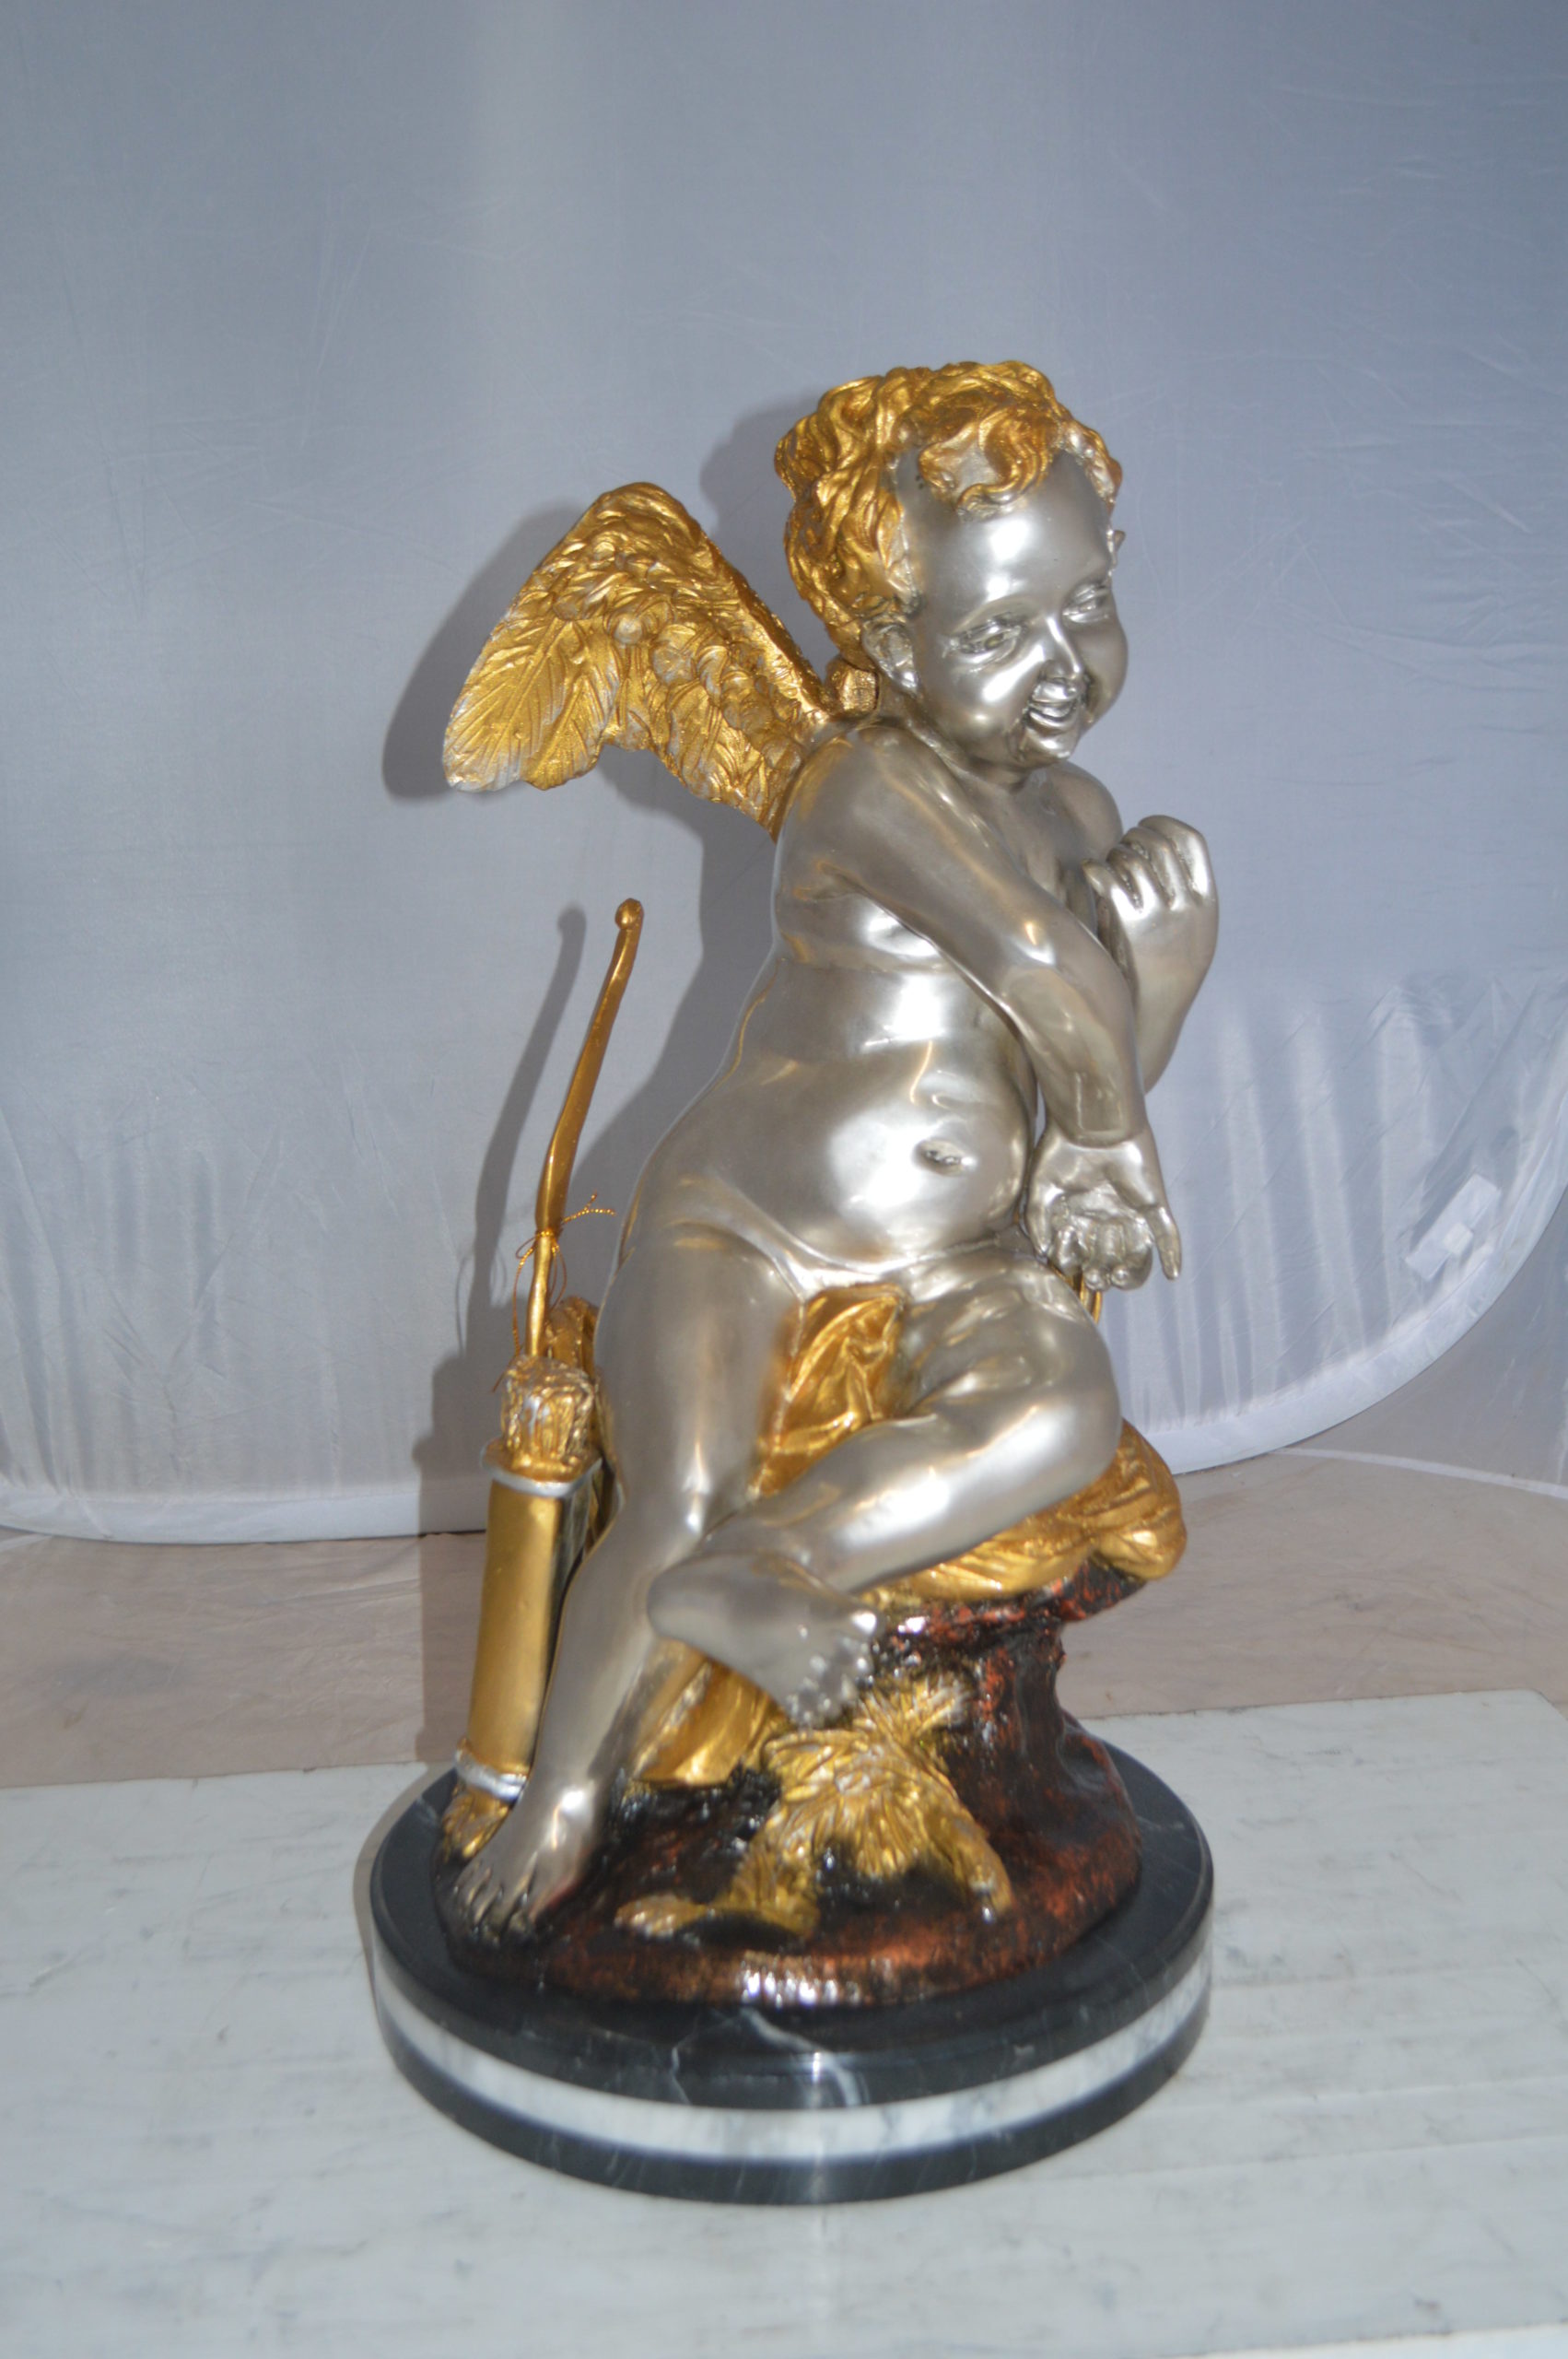 Nifao Cupid Girl On A Rock Bronze Statue - Size: 20"L x 15"W x 25"H. - image 2 of 14